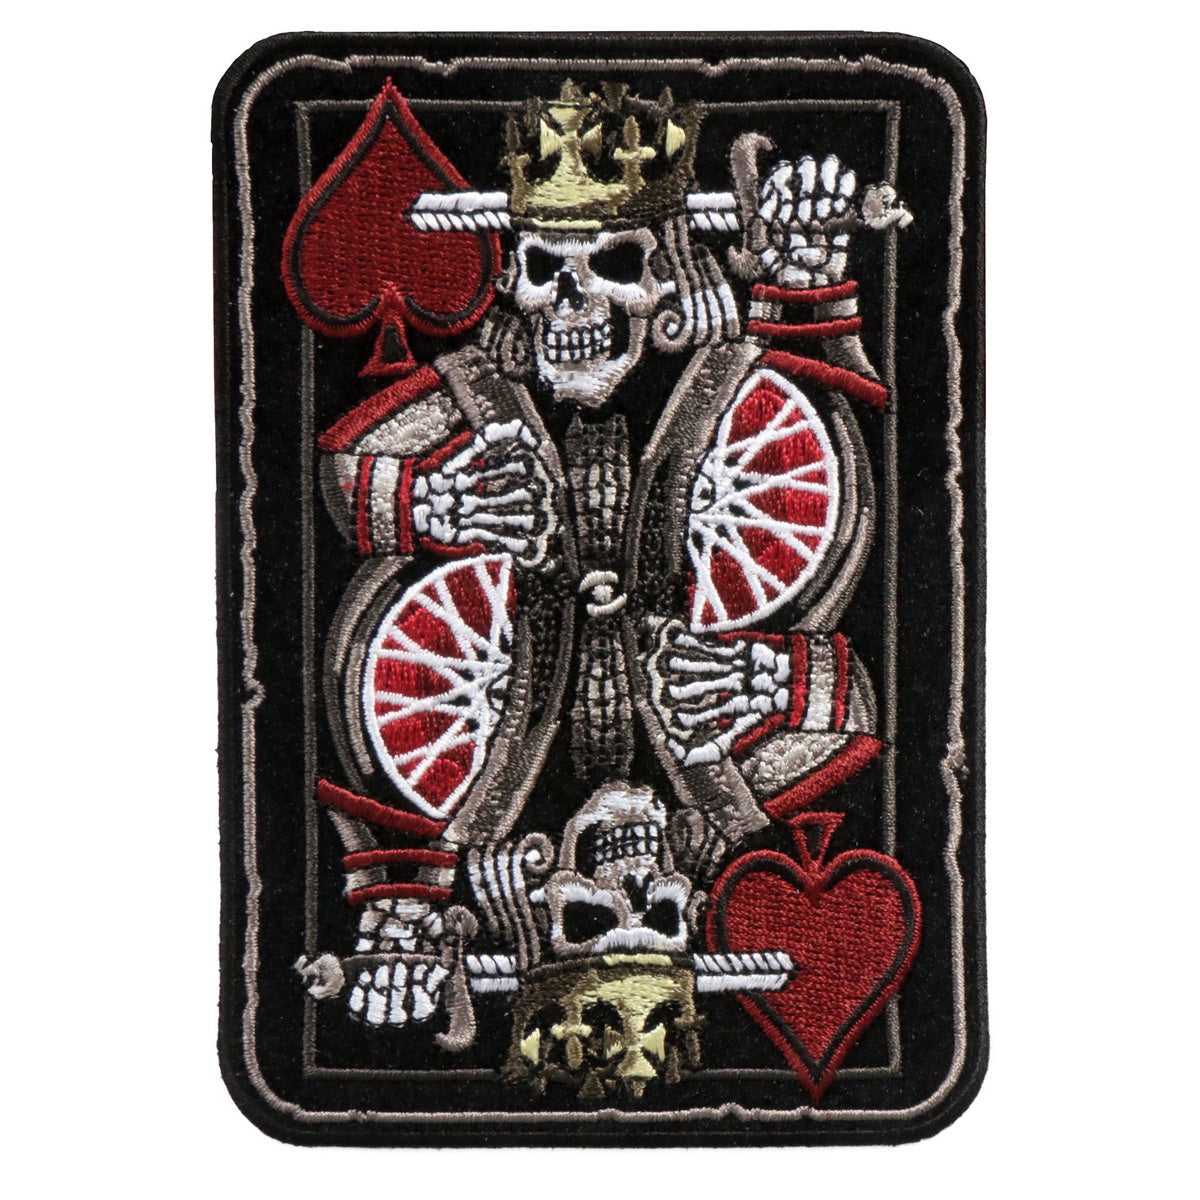 Hot Leathers PPA7633 Suicide King 3.5" x 4" Patch